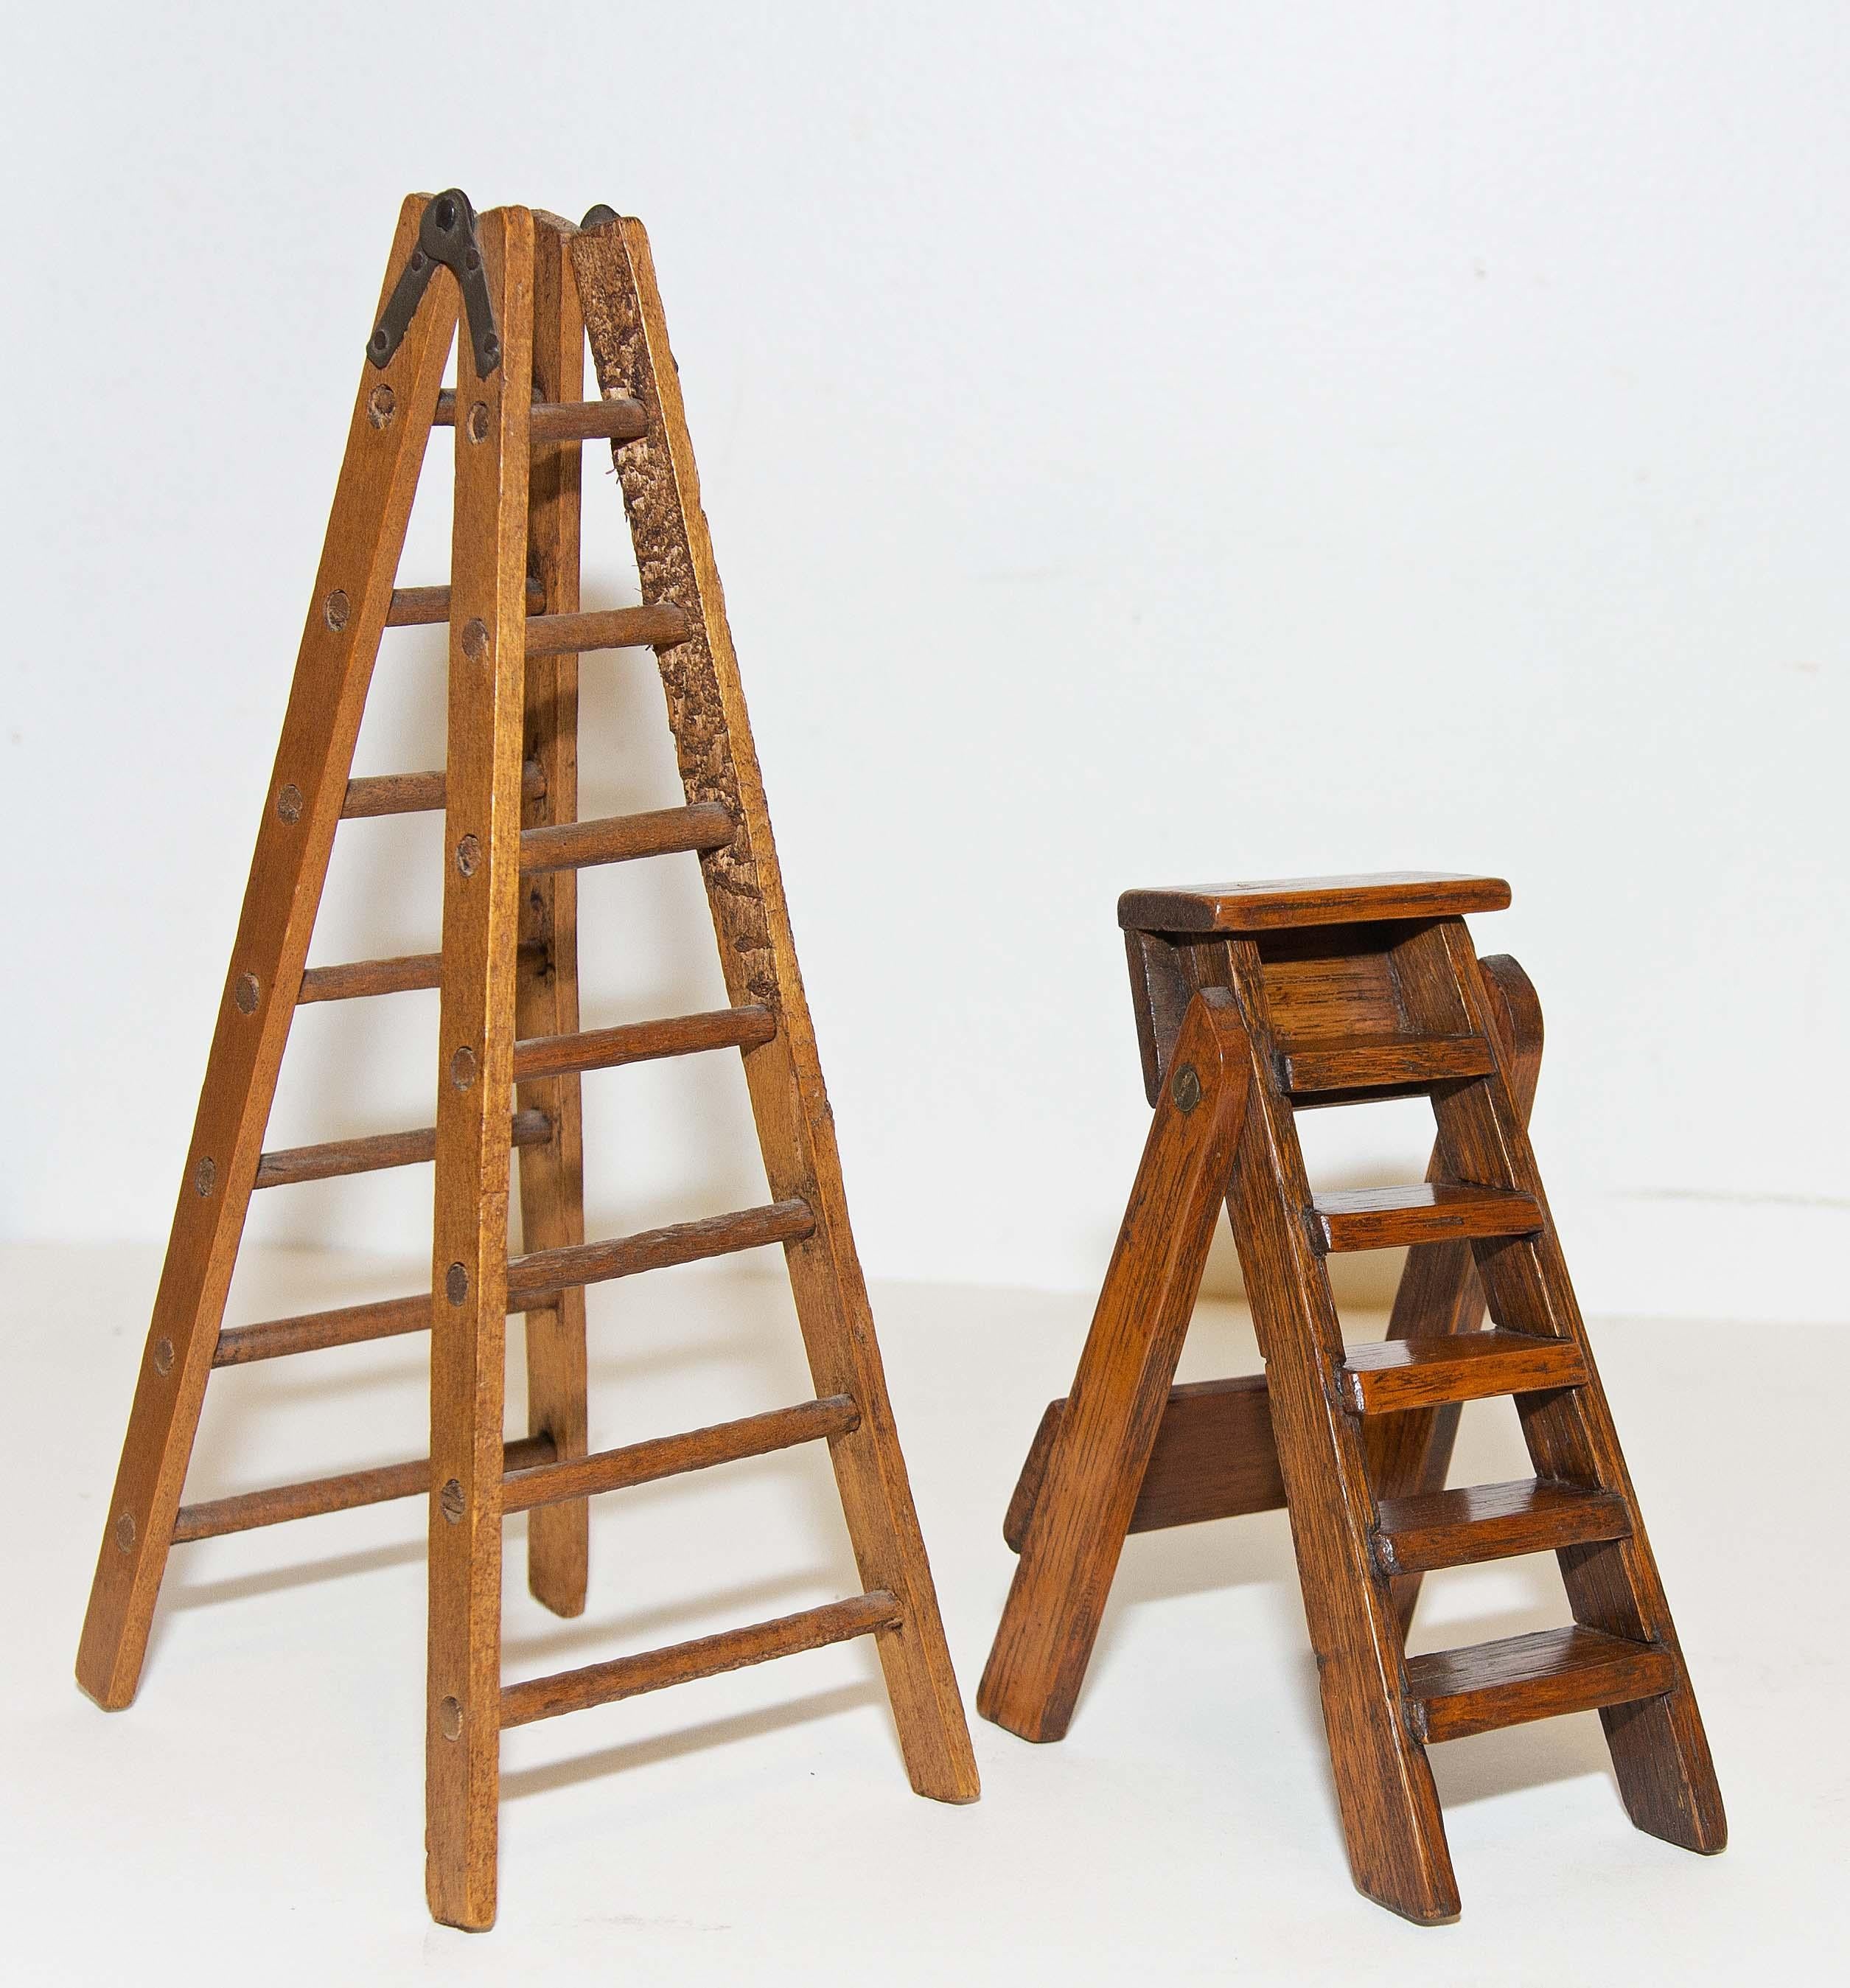 Antique salesman models of folding step ladders. Handmade, early 20th century. Measures: Tallest is 10